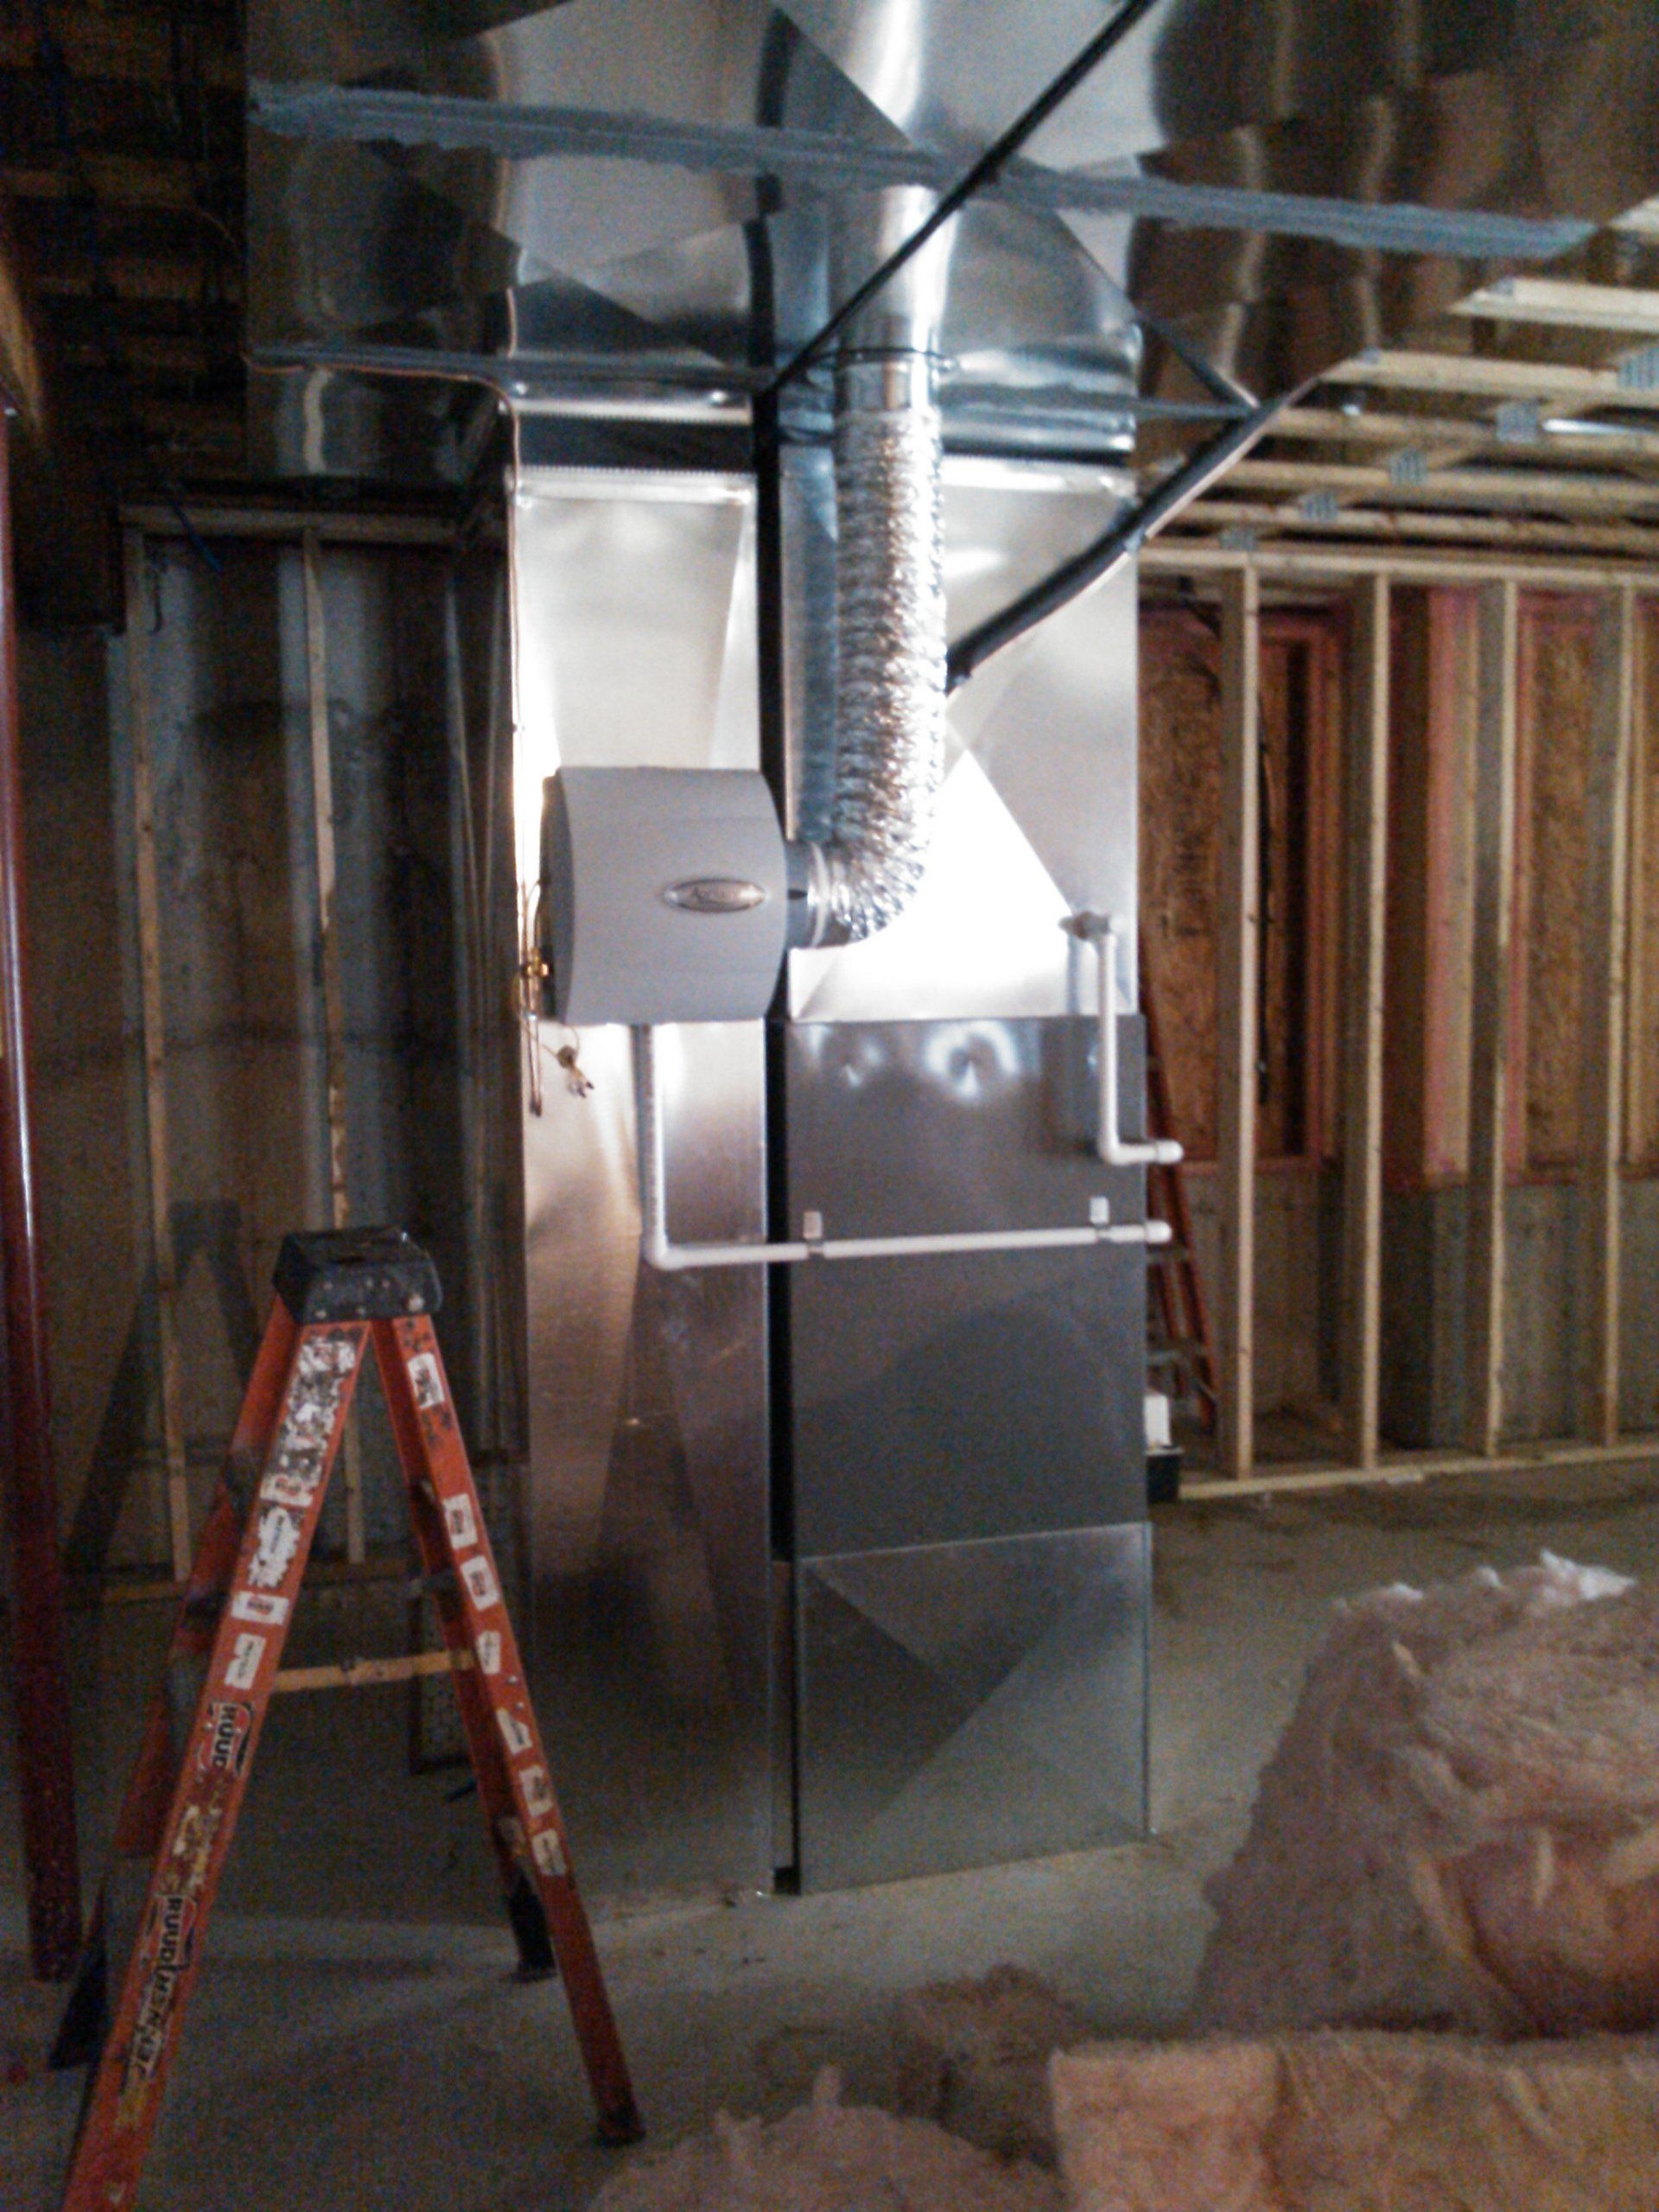 New furnace and heater installed in Albany, NY